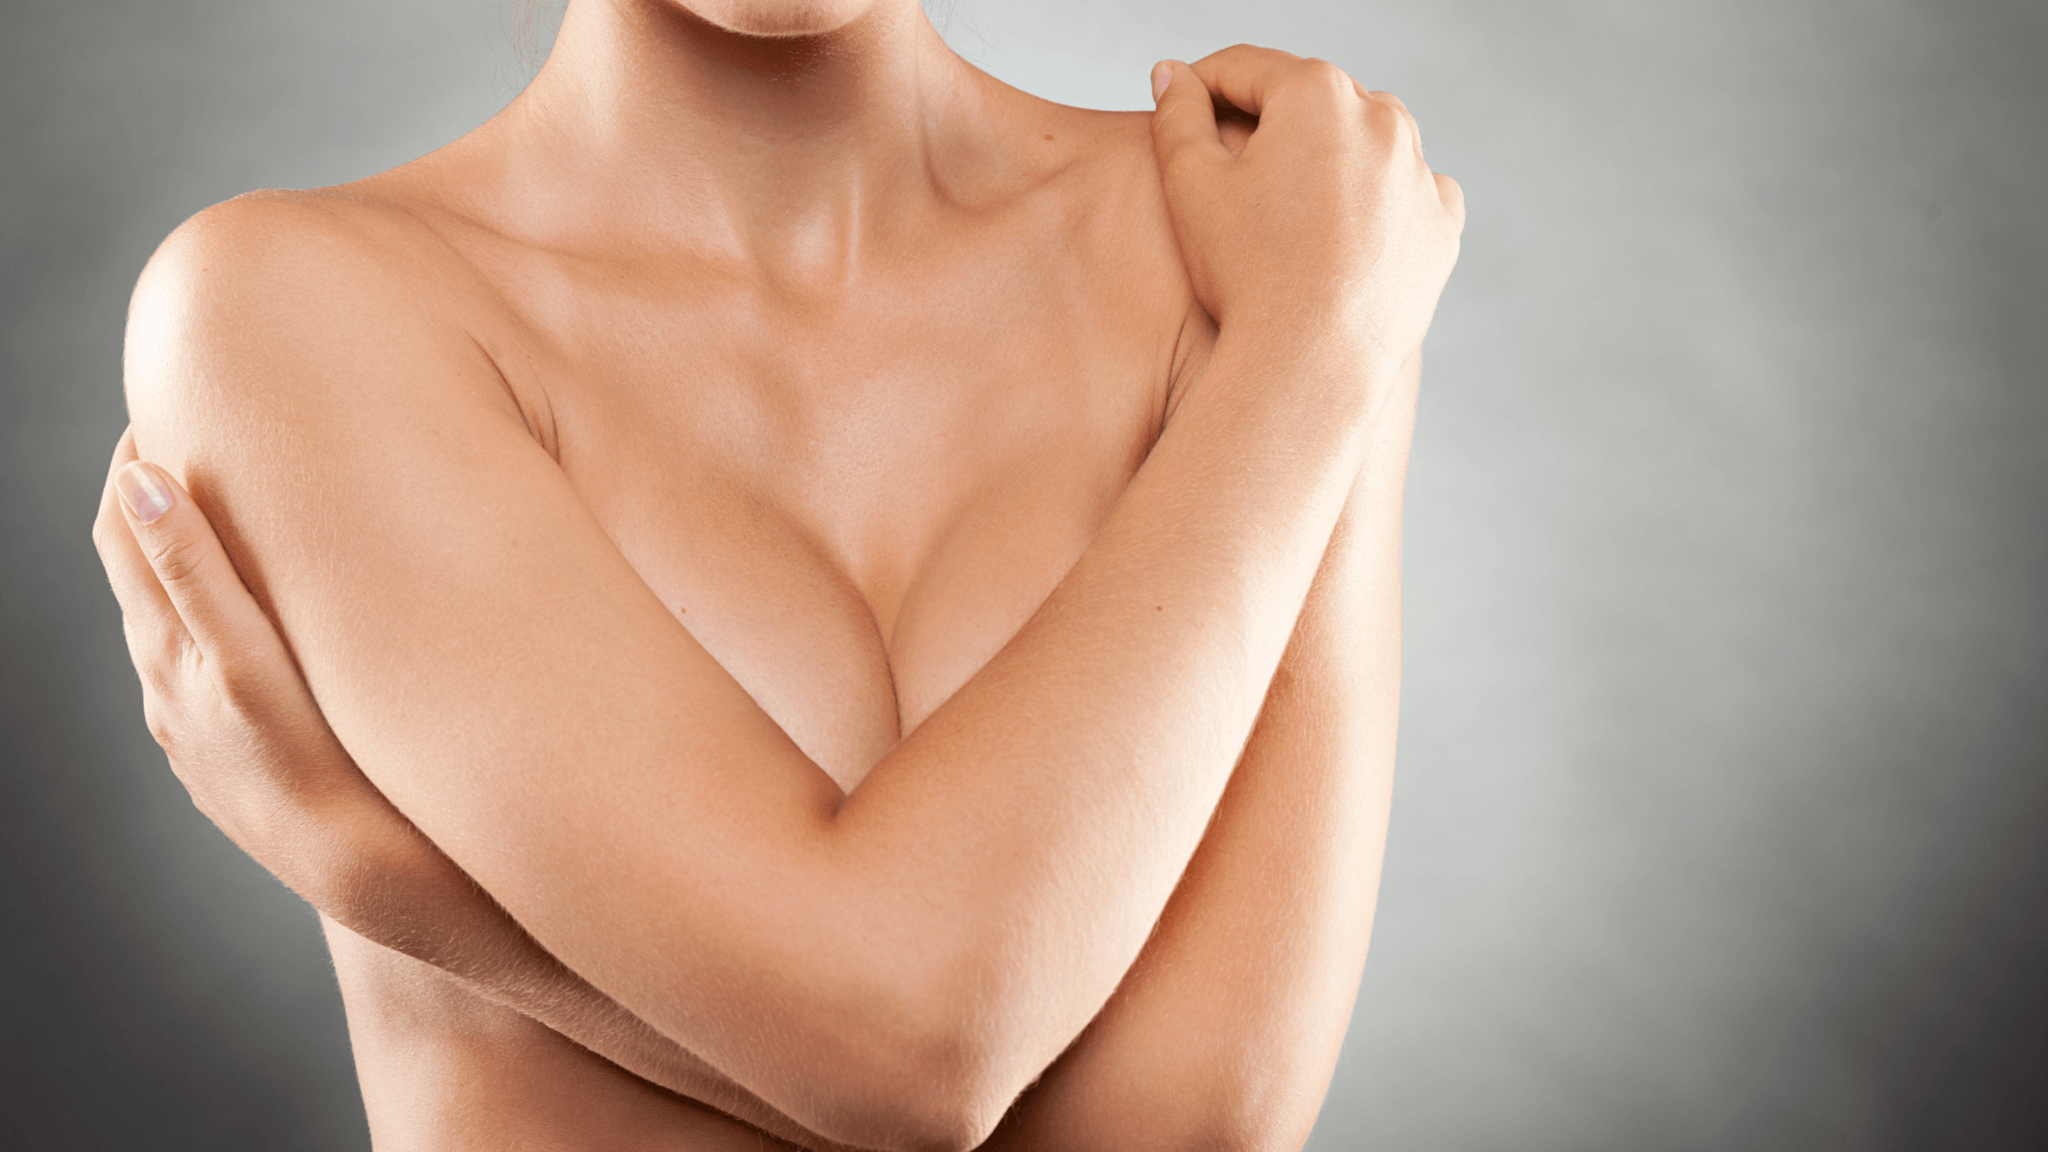 Whats the Difference Between Natural Breasts and Implants?